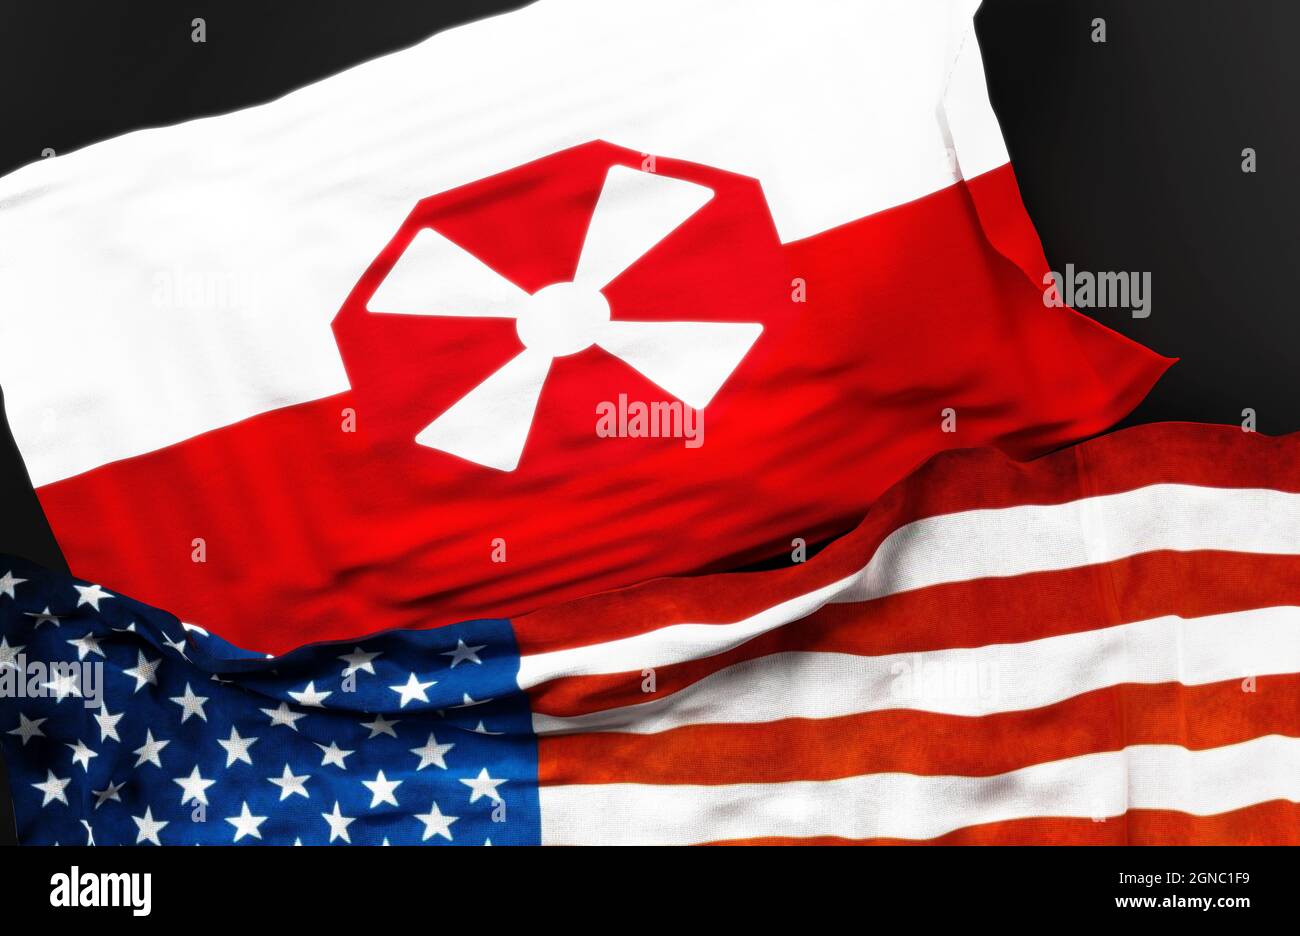 Flag of the Eighth United States Army along with a flag of the United States of America as a symbol of unity between them, 3d illustration Stock Photo